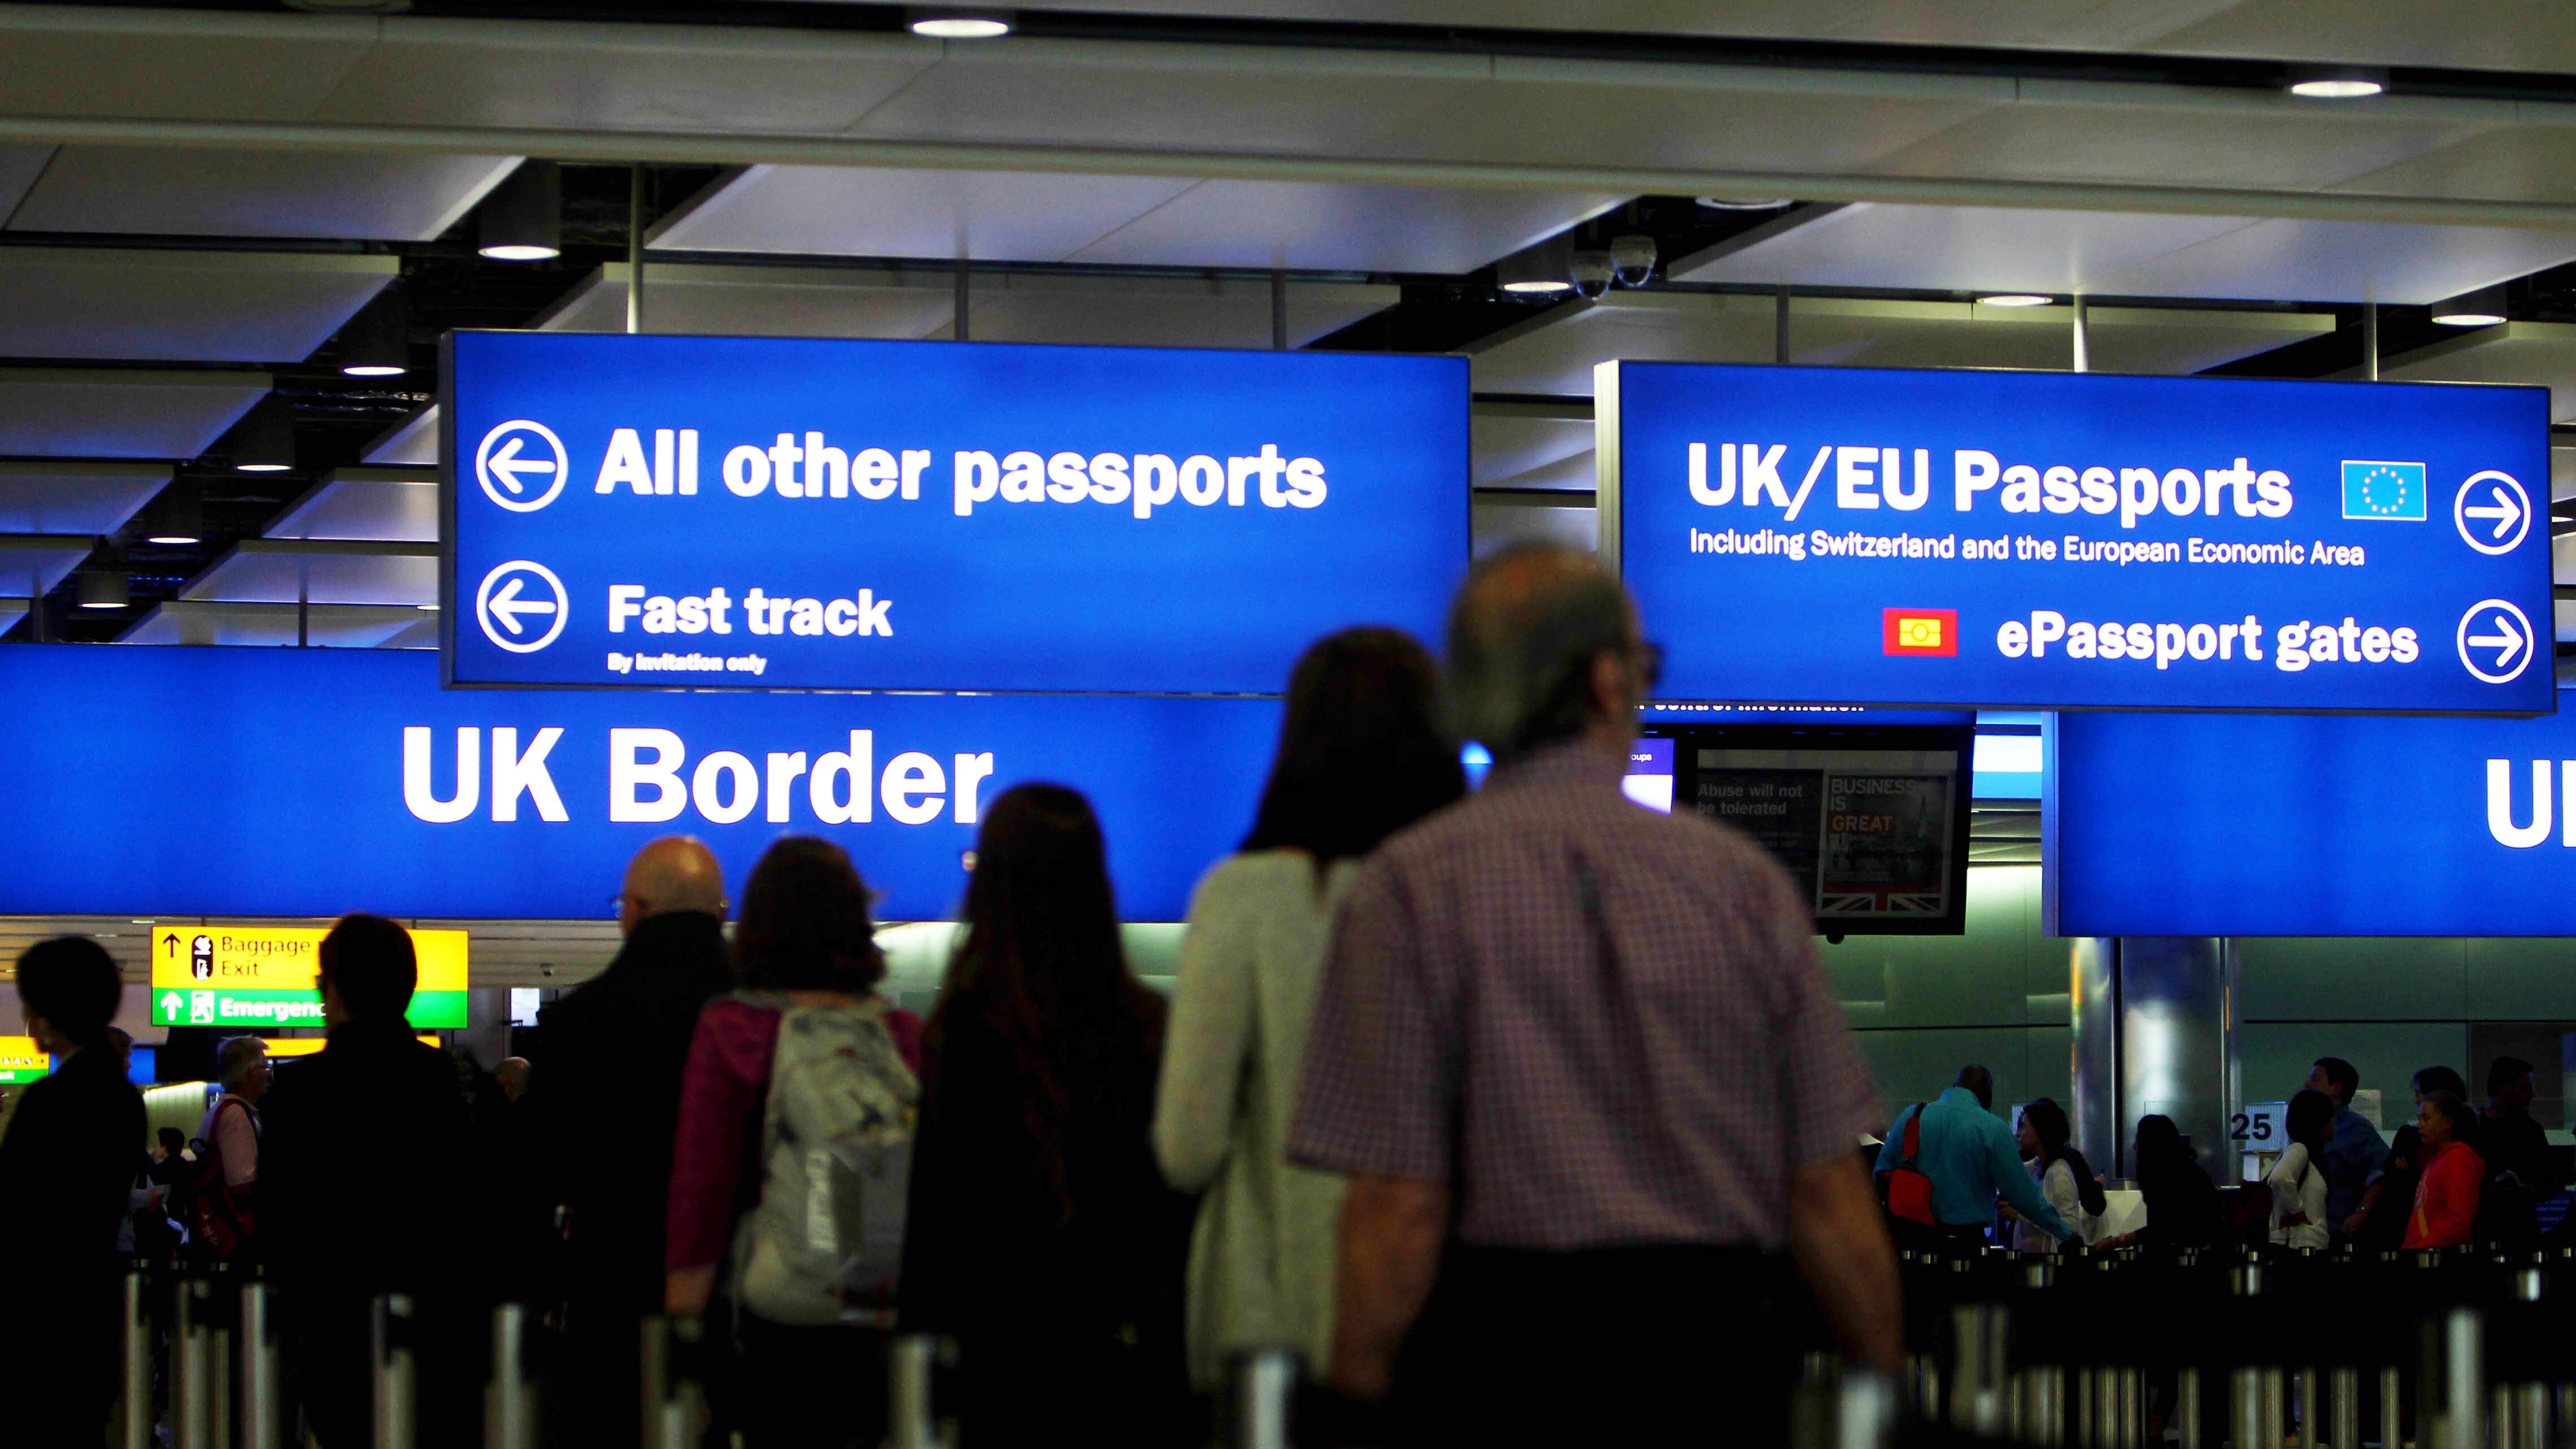 The total number of visas issued to people coming to the UK has fallen slightly